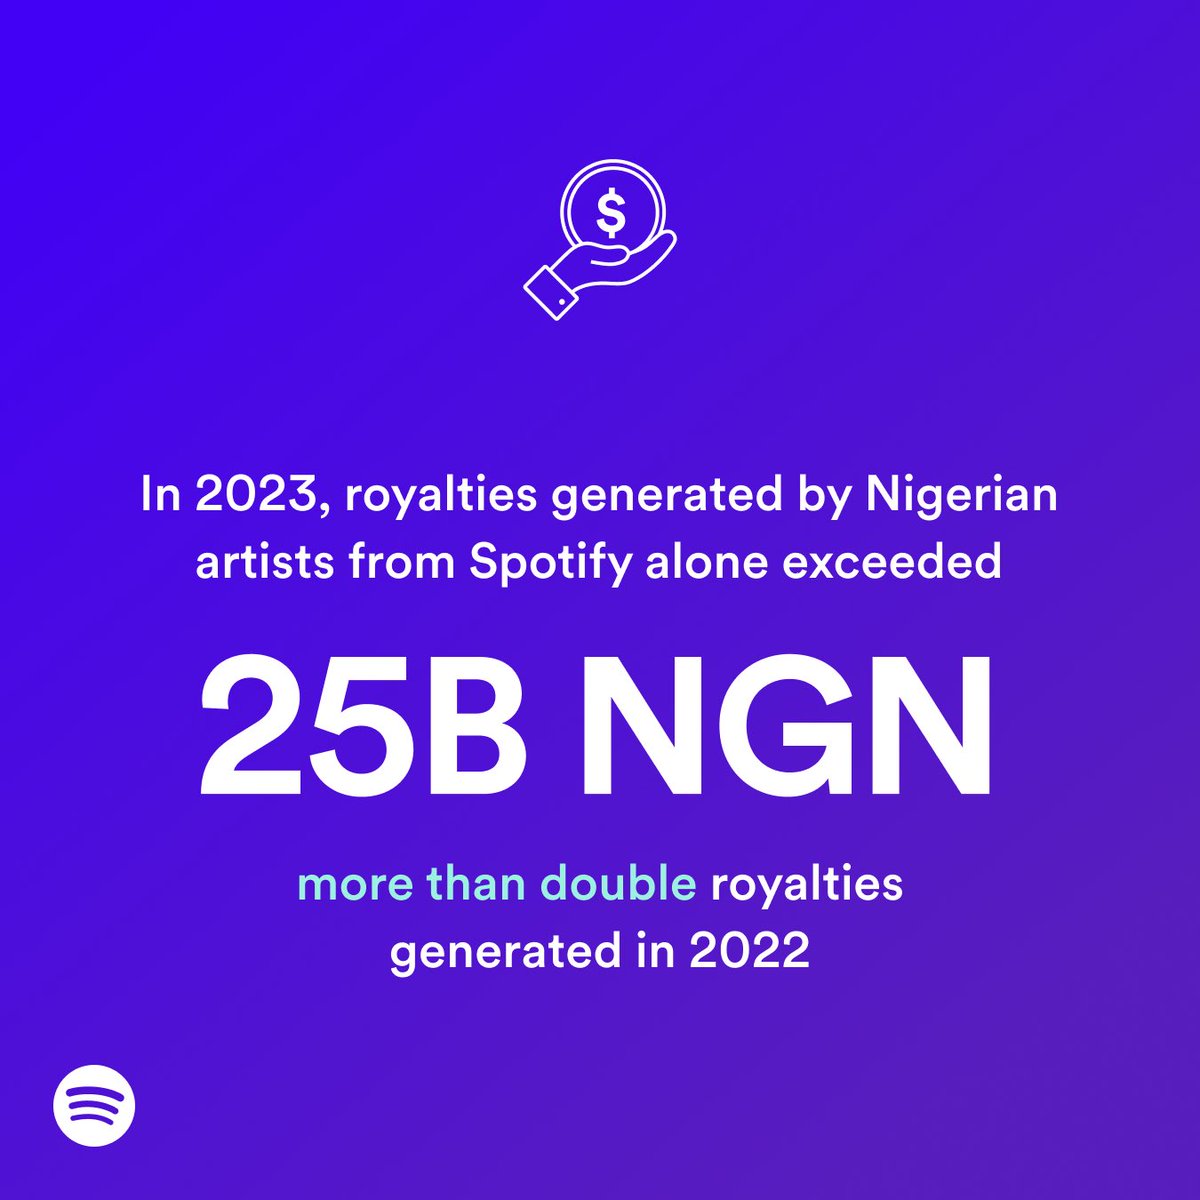 The significant growth in royalties generated by Nigerian artists on our platform is a powerful testament to their talent, creativity, and global appeal.